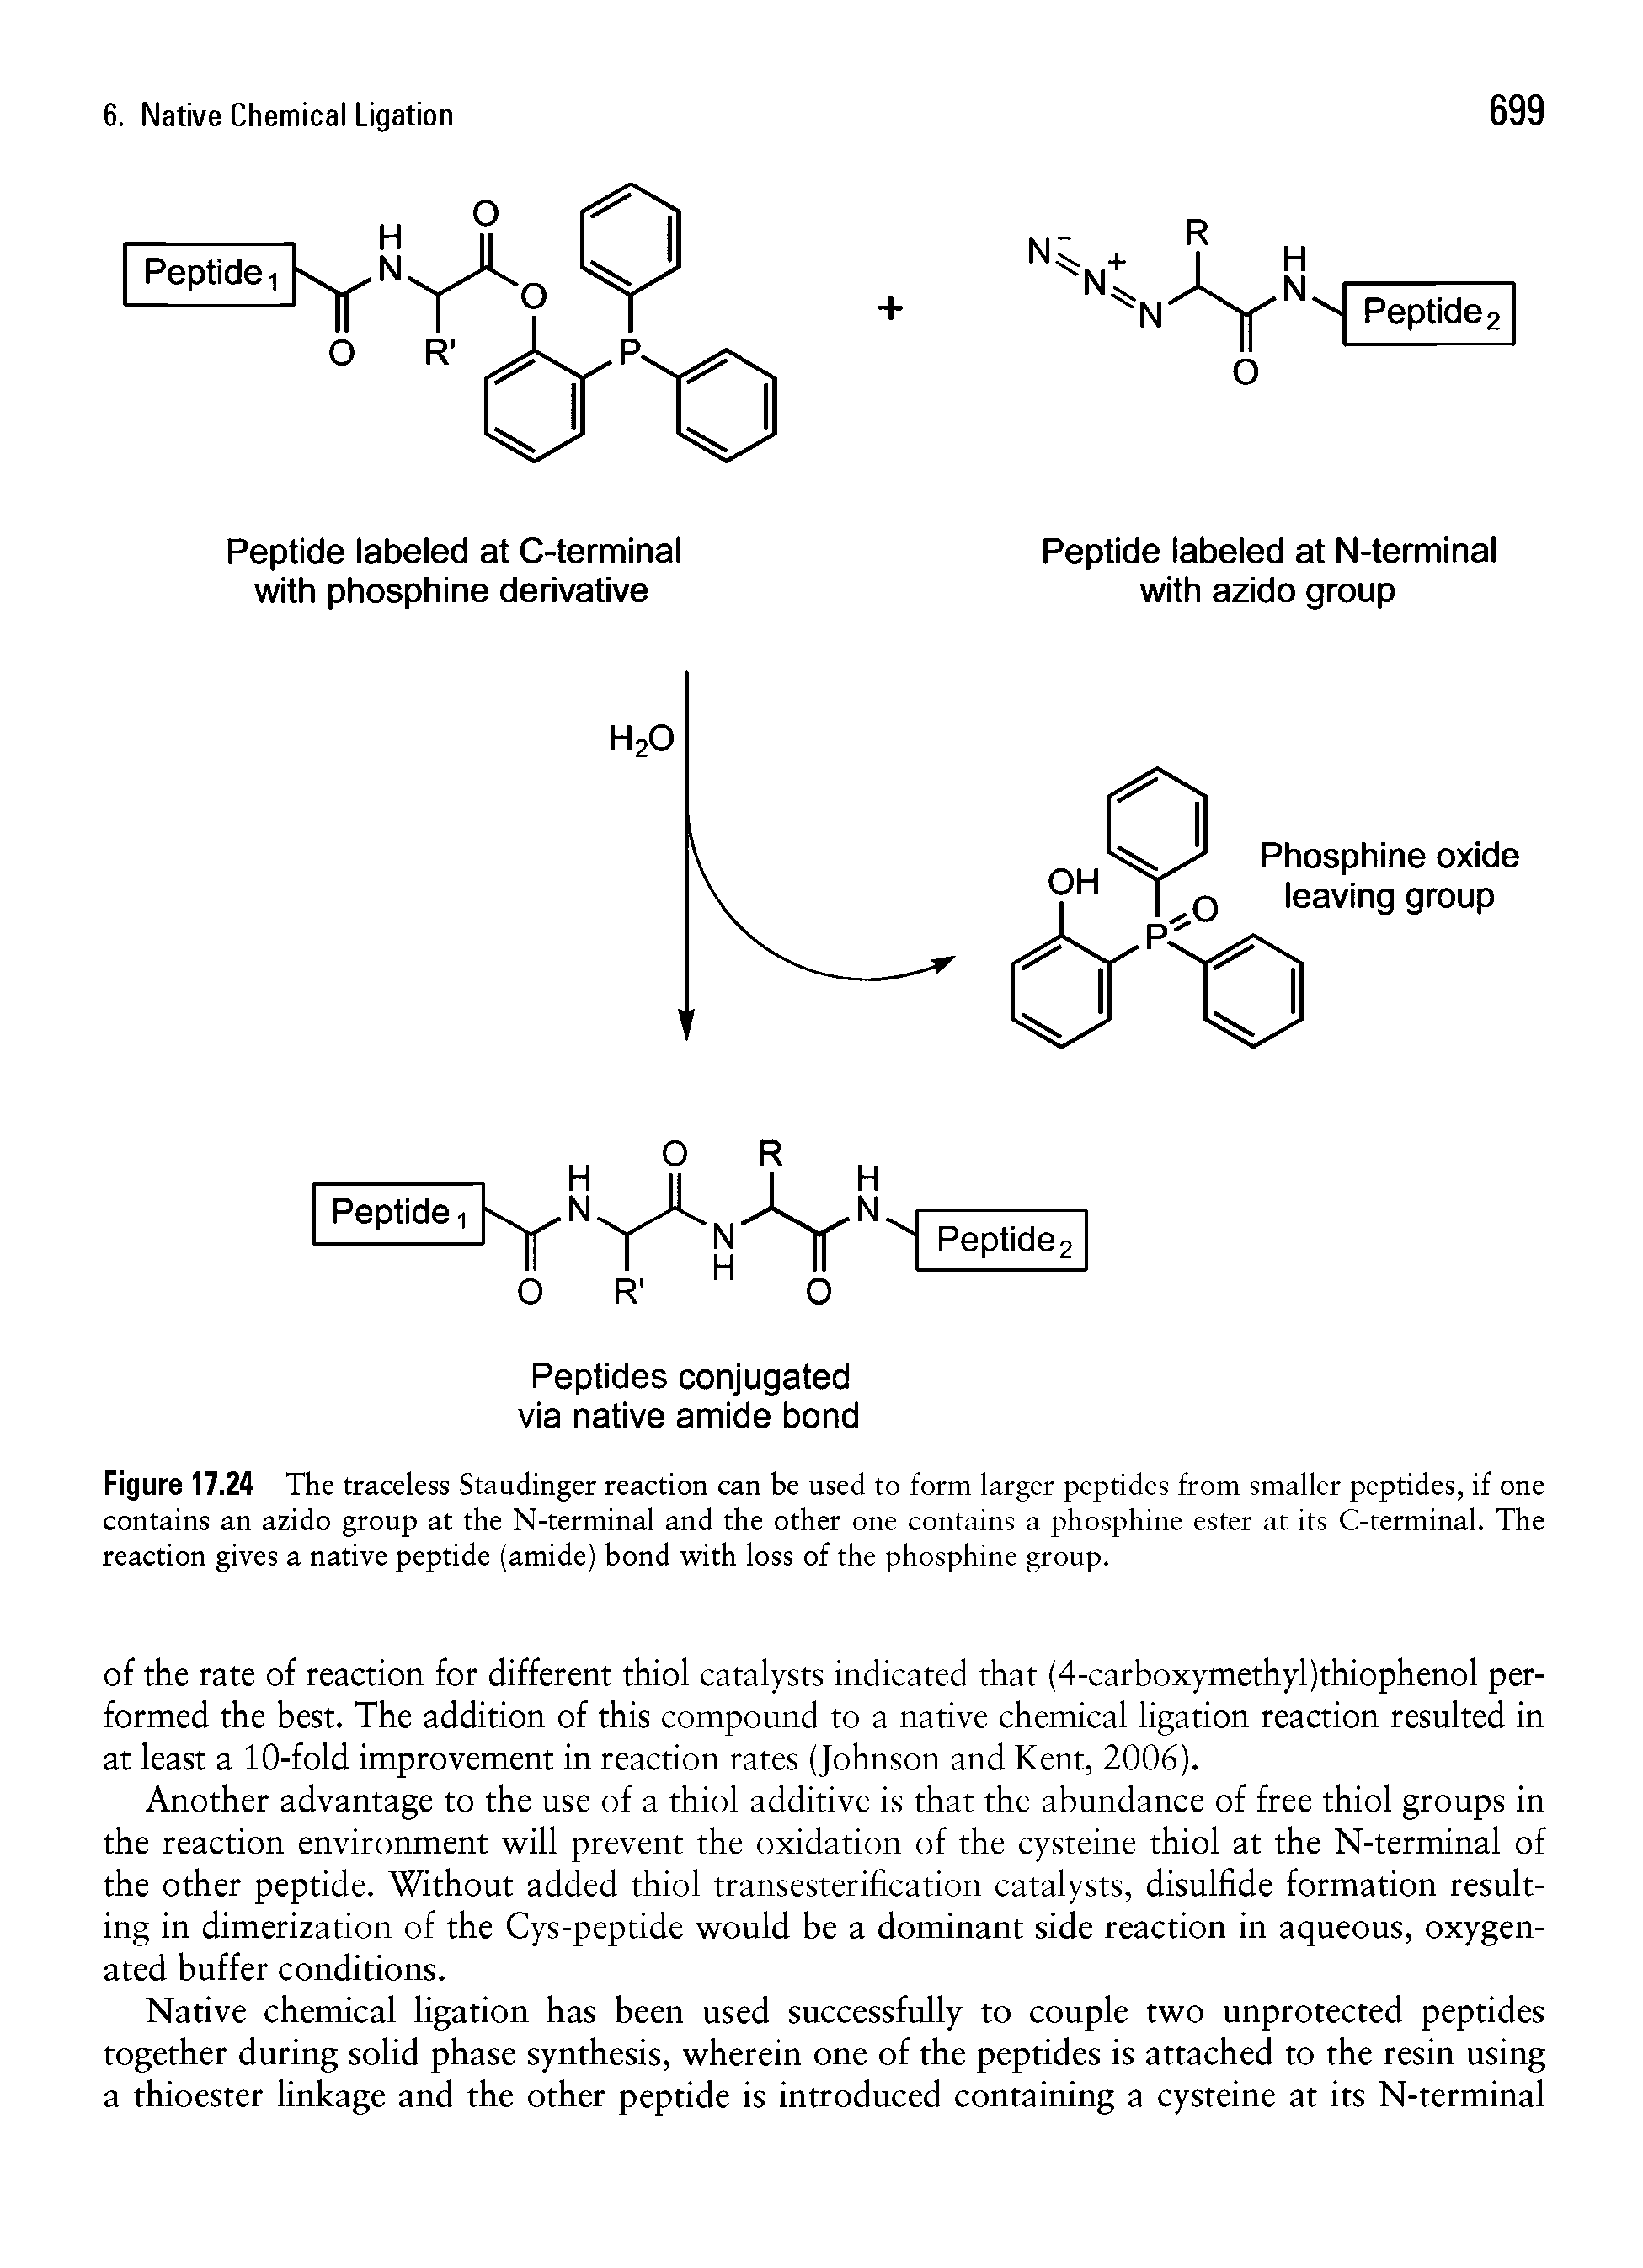 Figure 17.24 The traceless Staudinger reaction can be used to form larger peptides from smaller peptides, if one contains an azido group at the N-terminal and the other one contains a phosphine ester at its C-terminal. The reaction gives a native peptide (amide) bond with loss of the phosphine group.